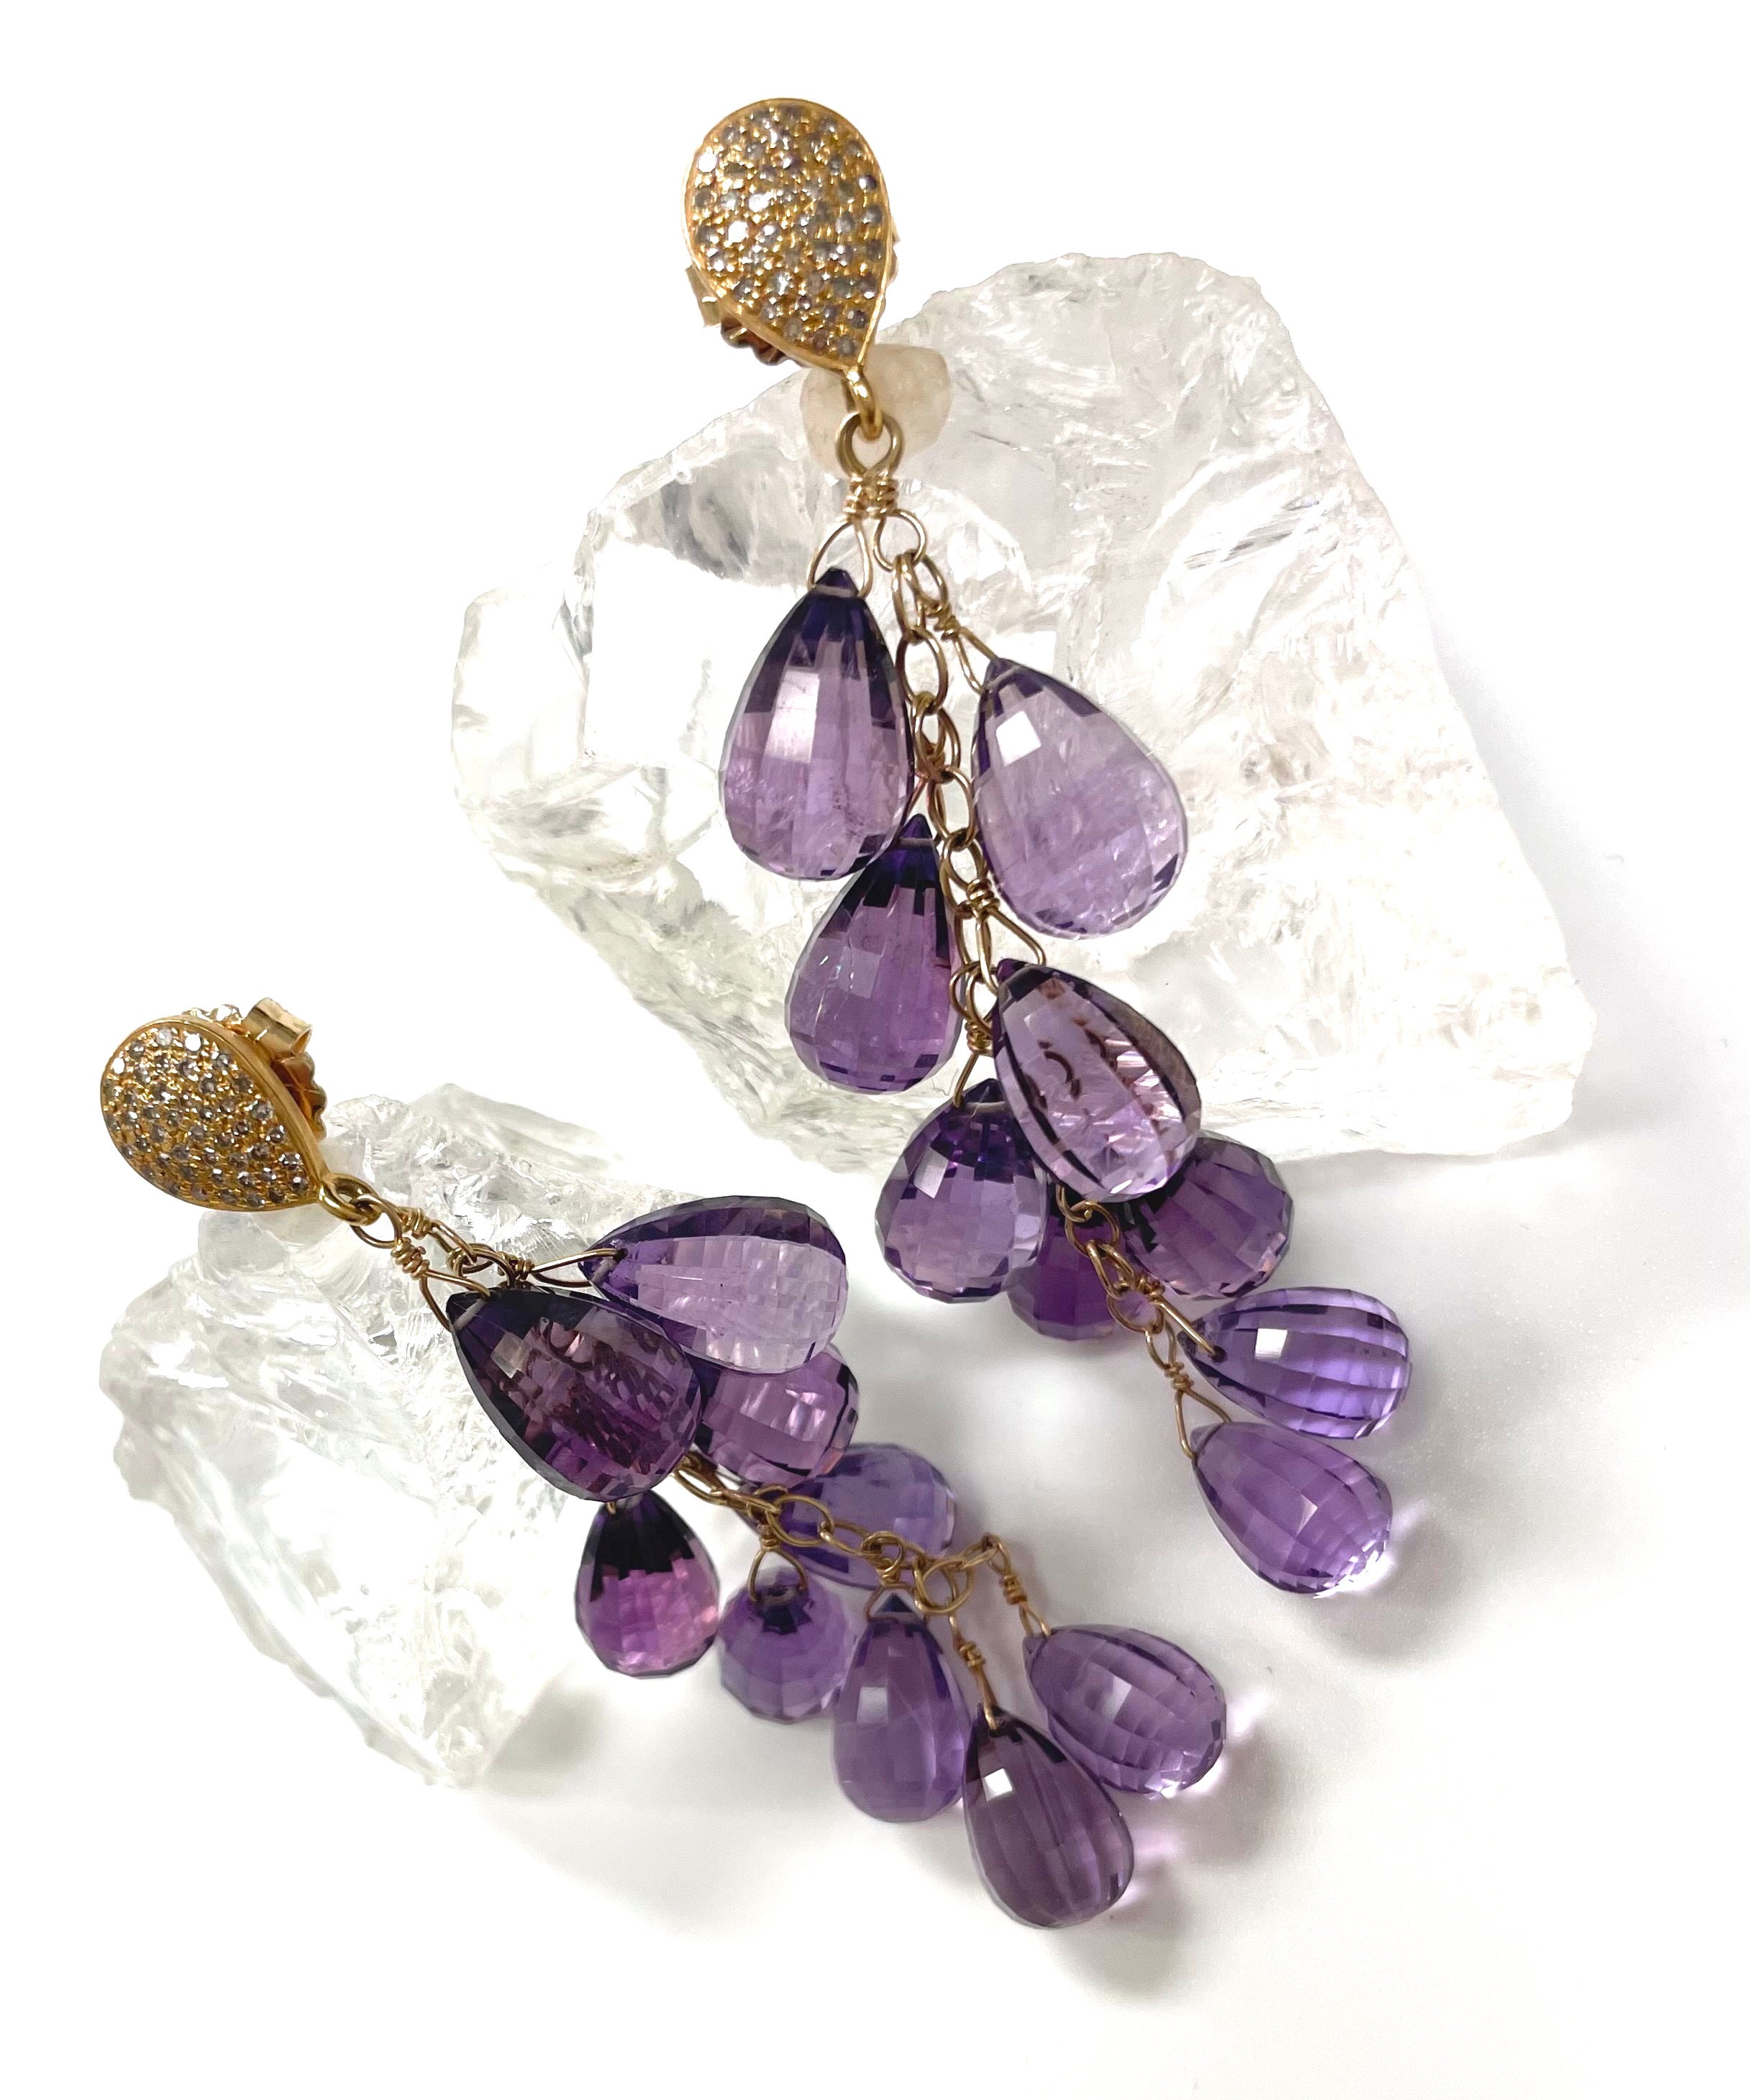 Description
Elegant statement Amethyst briolette dangle earrings, hand wire wrapped in 14 carat yellow gold, suspended from a pave diamond stud.
Item # E3294

Materials and Weight
Amethyst, 99 carats, faceted briolette shape
Pave diamonds Vermeil